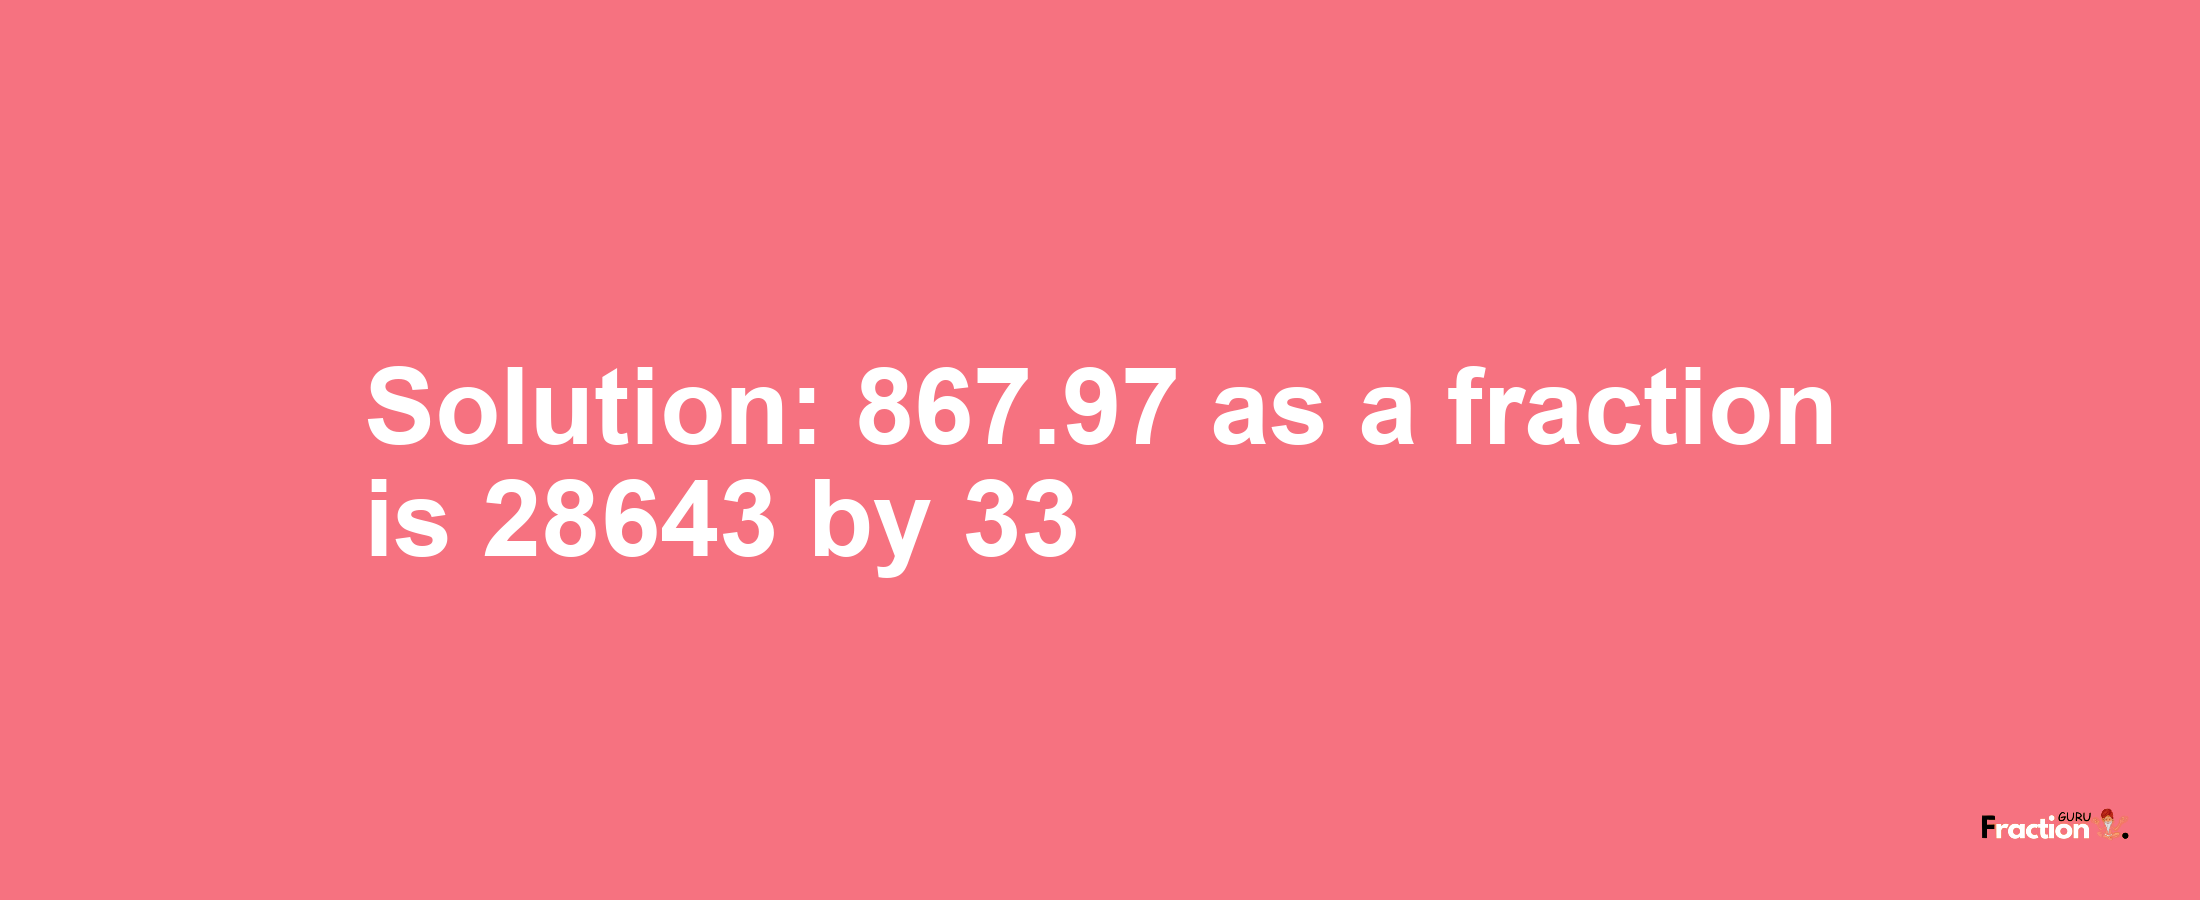 Solution:867.97 as a fraction is 28643/33